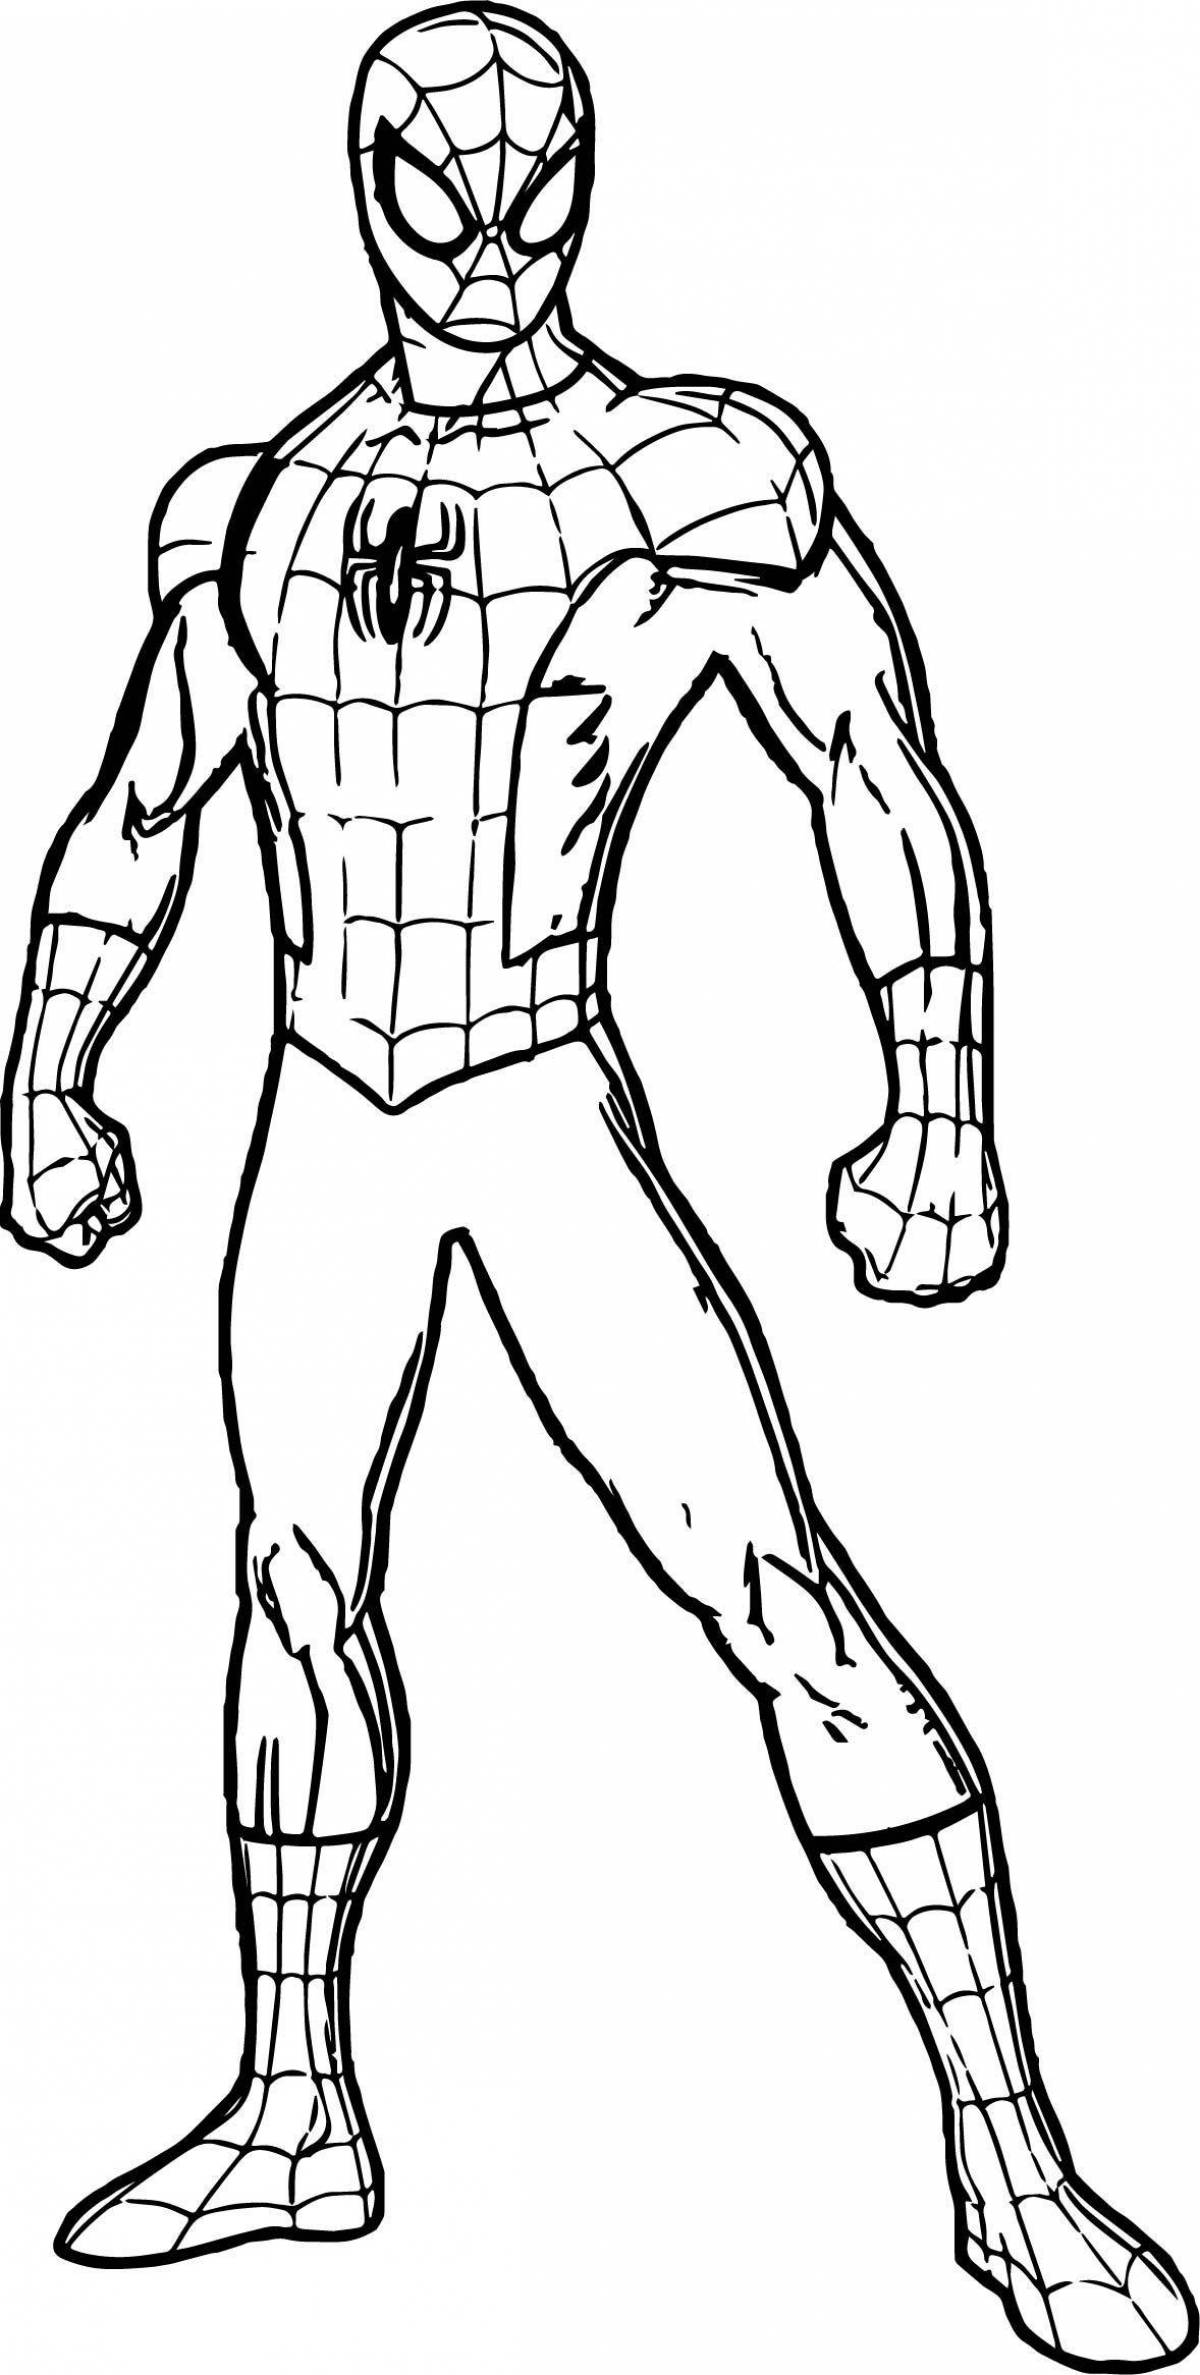 Beautifully detailed spider-man coloring page